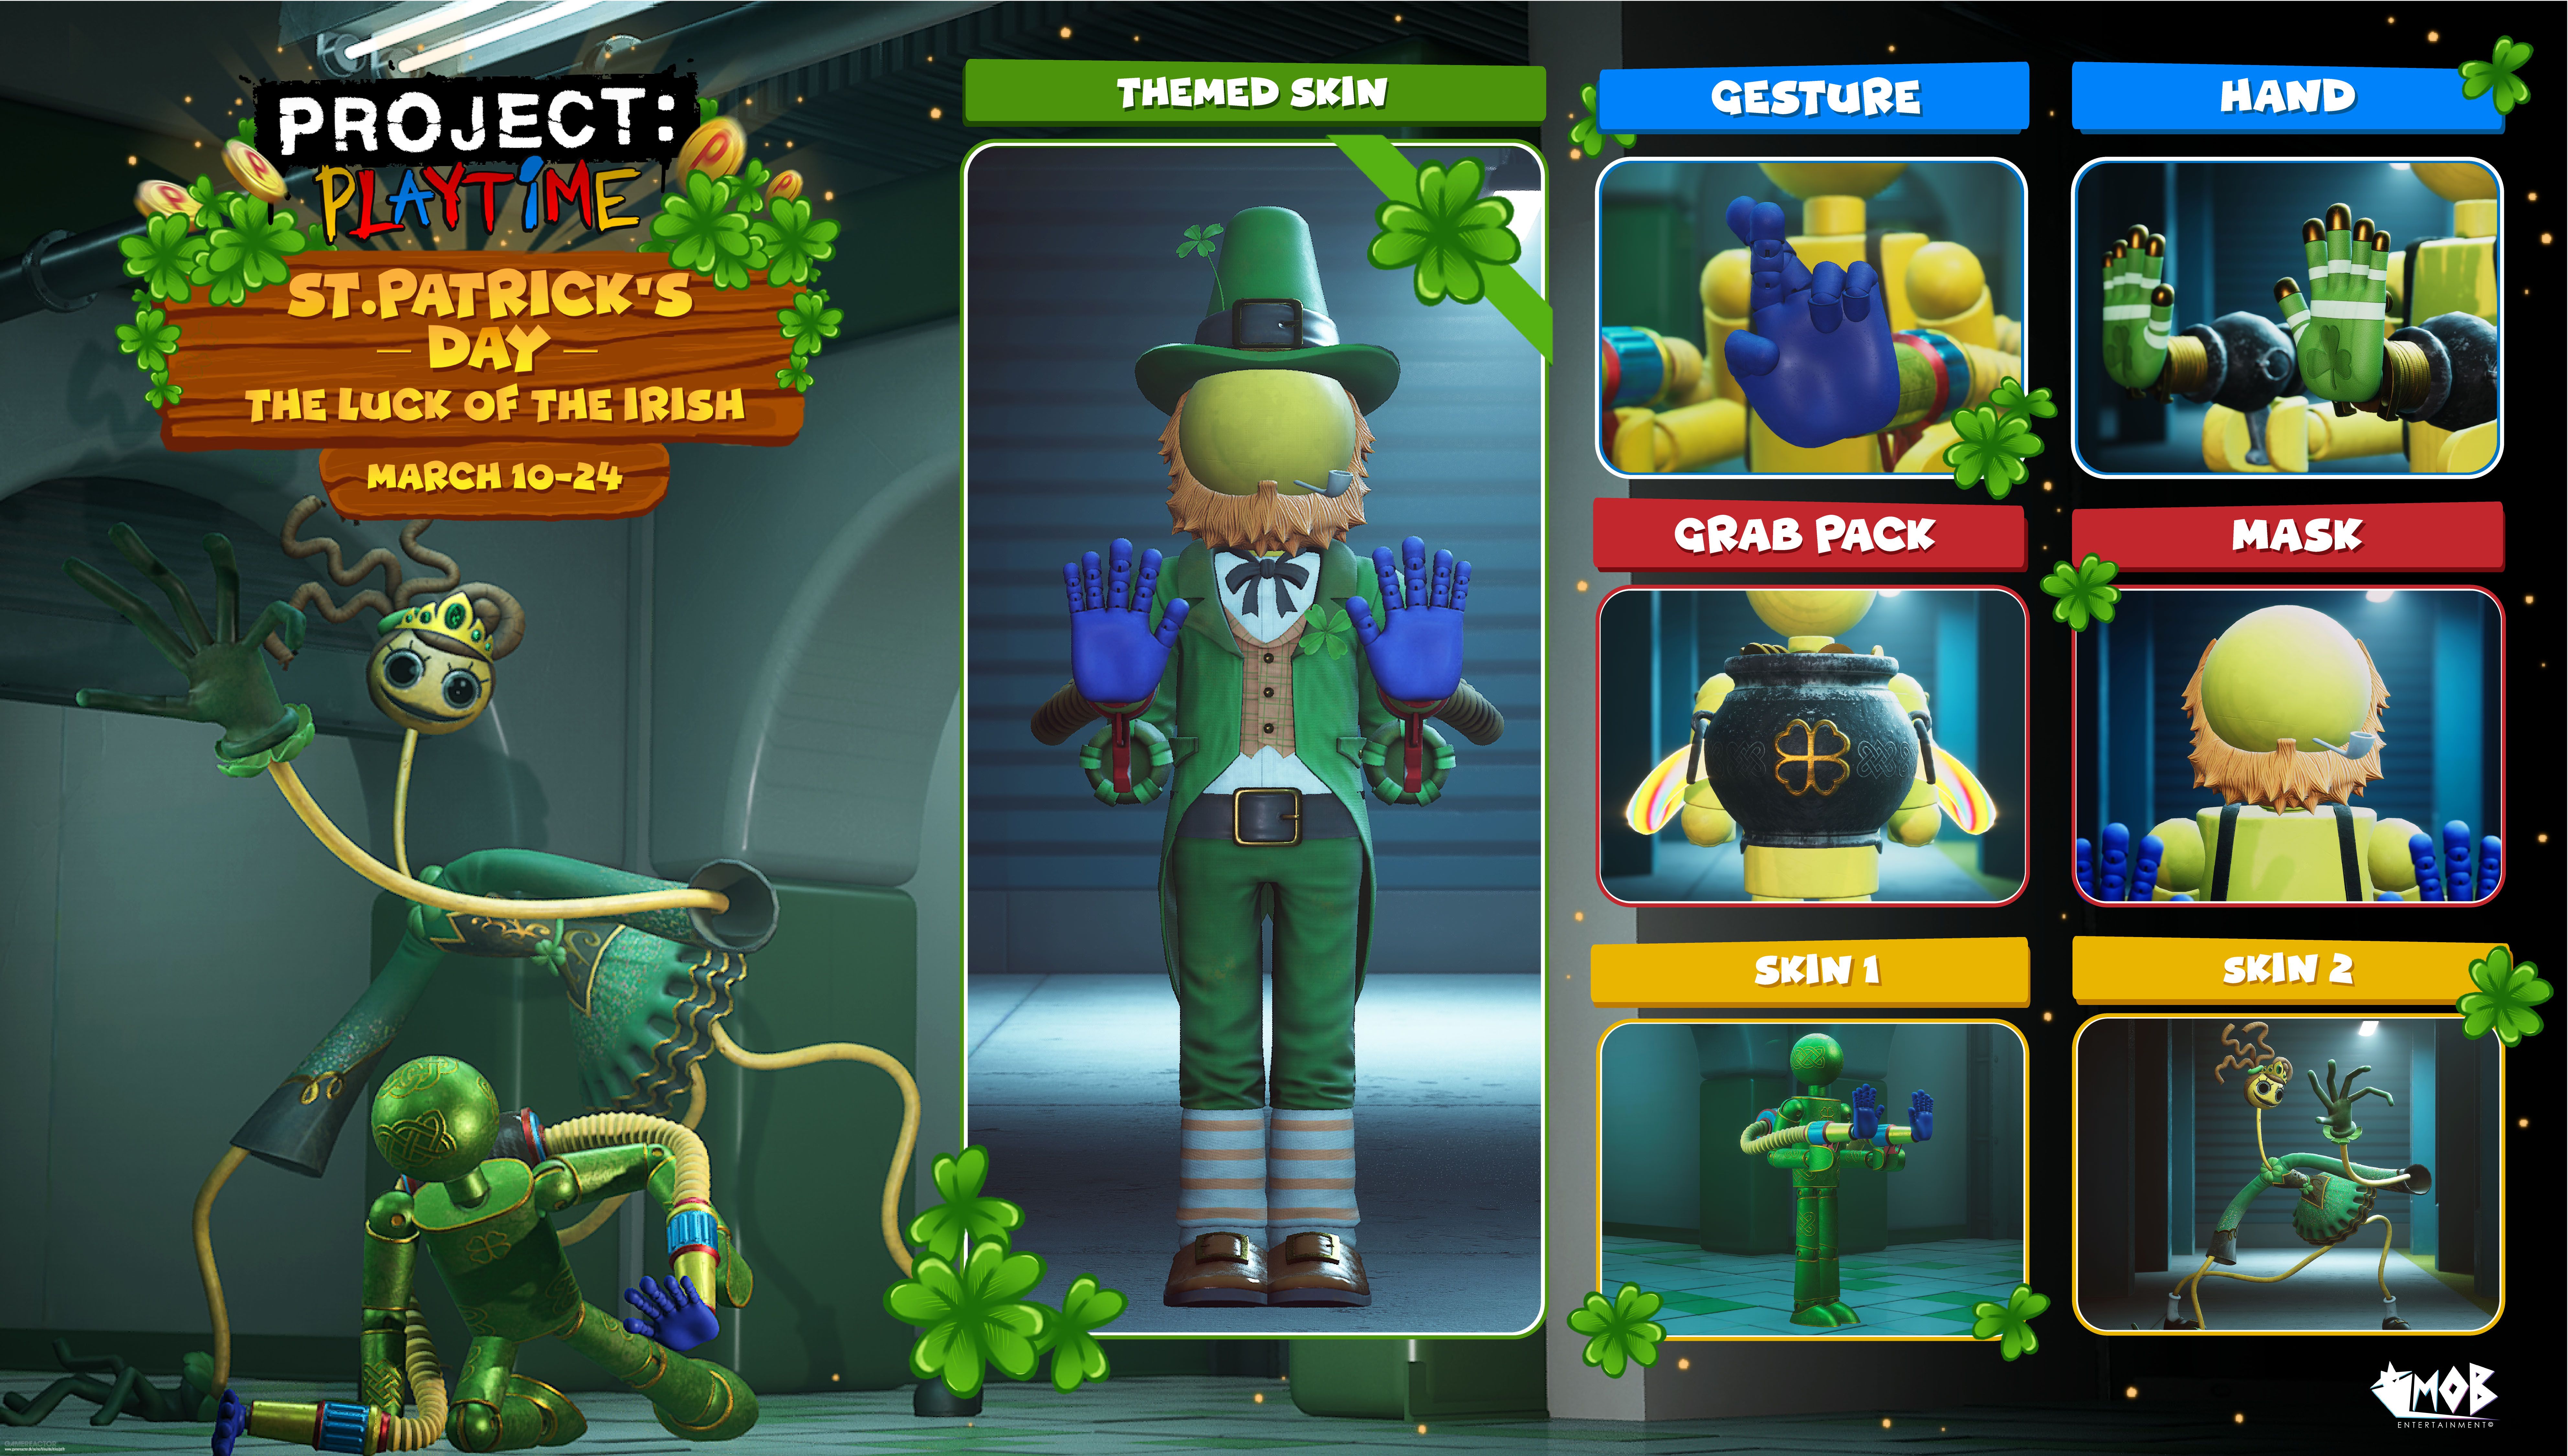 The St. Patrick’s Day update has arrived for Project: Playtime